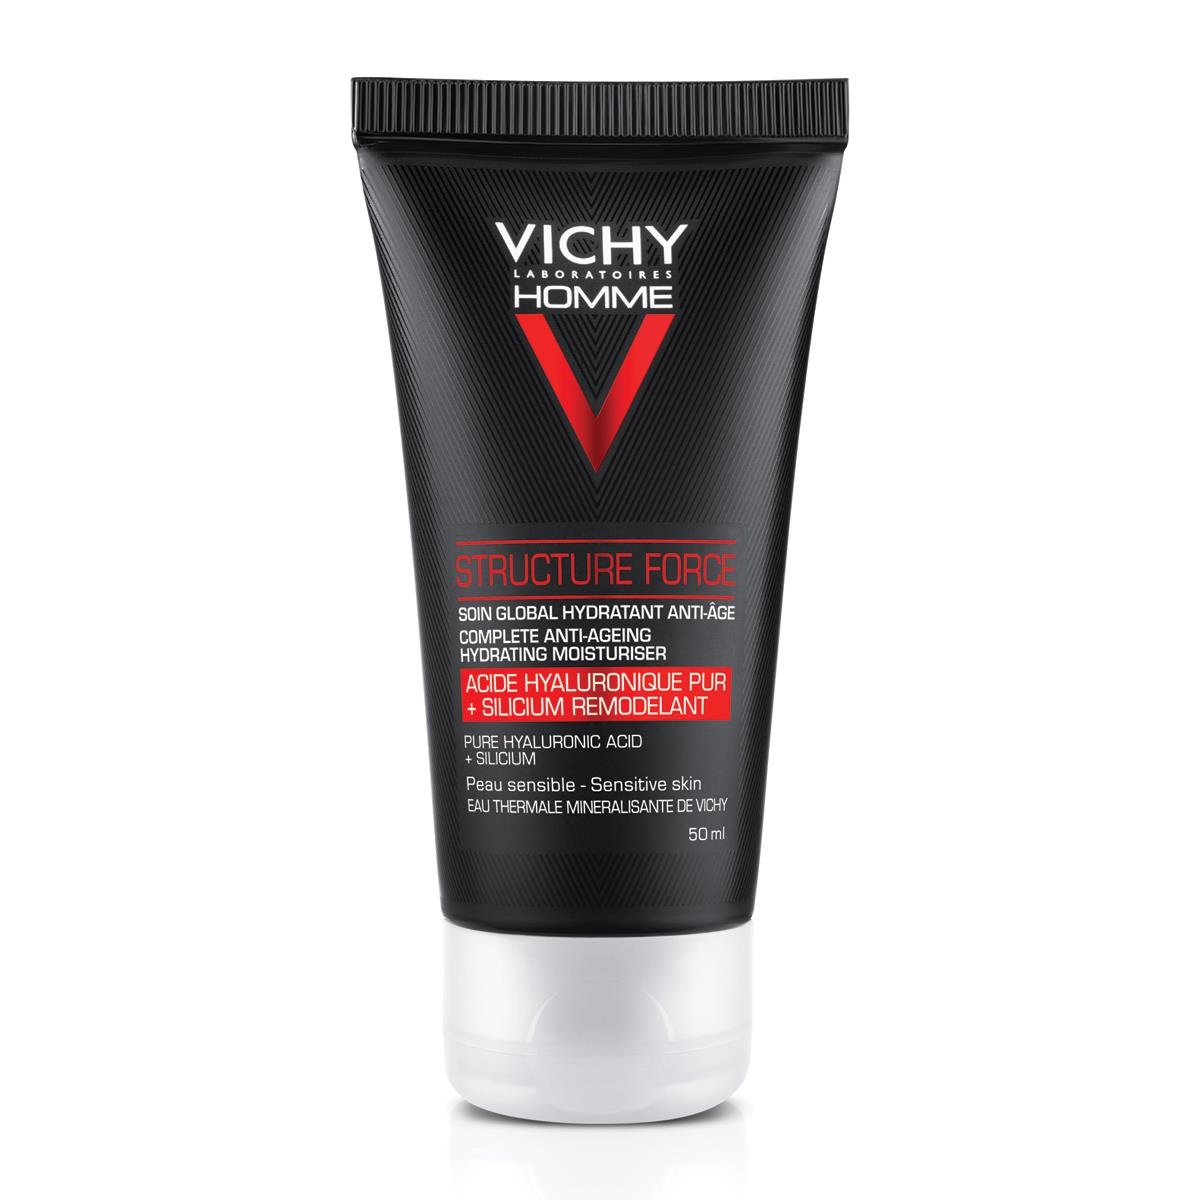 VICHY HOMME STRUCTURE FORCE 50 ML | The Glow Shop